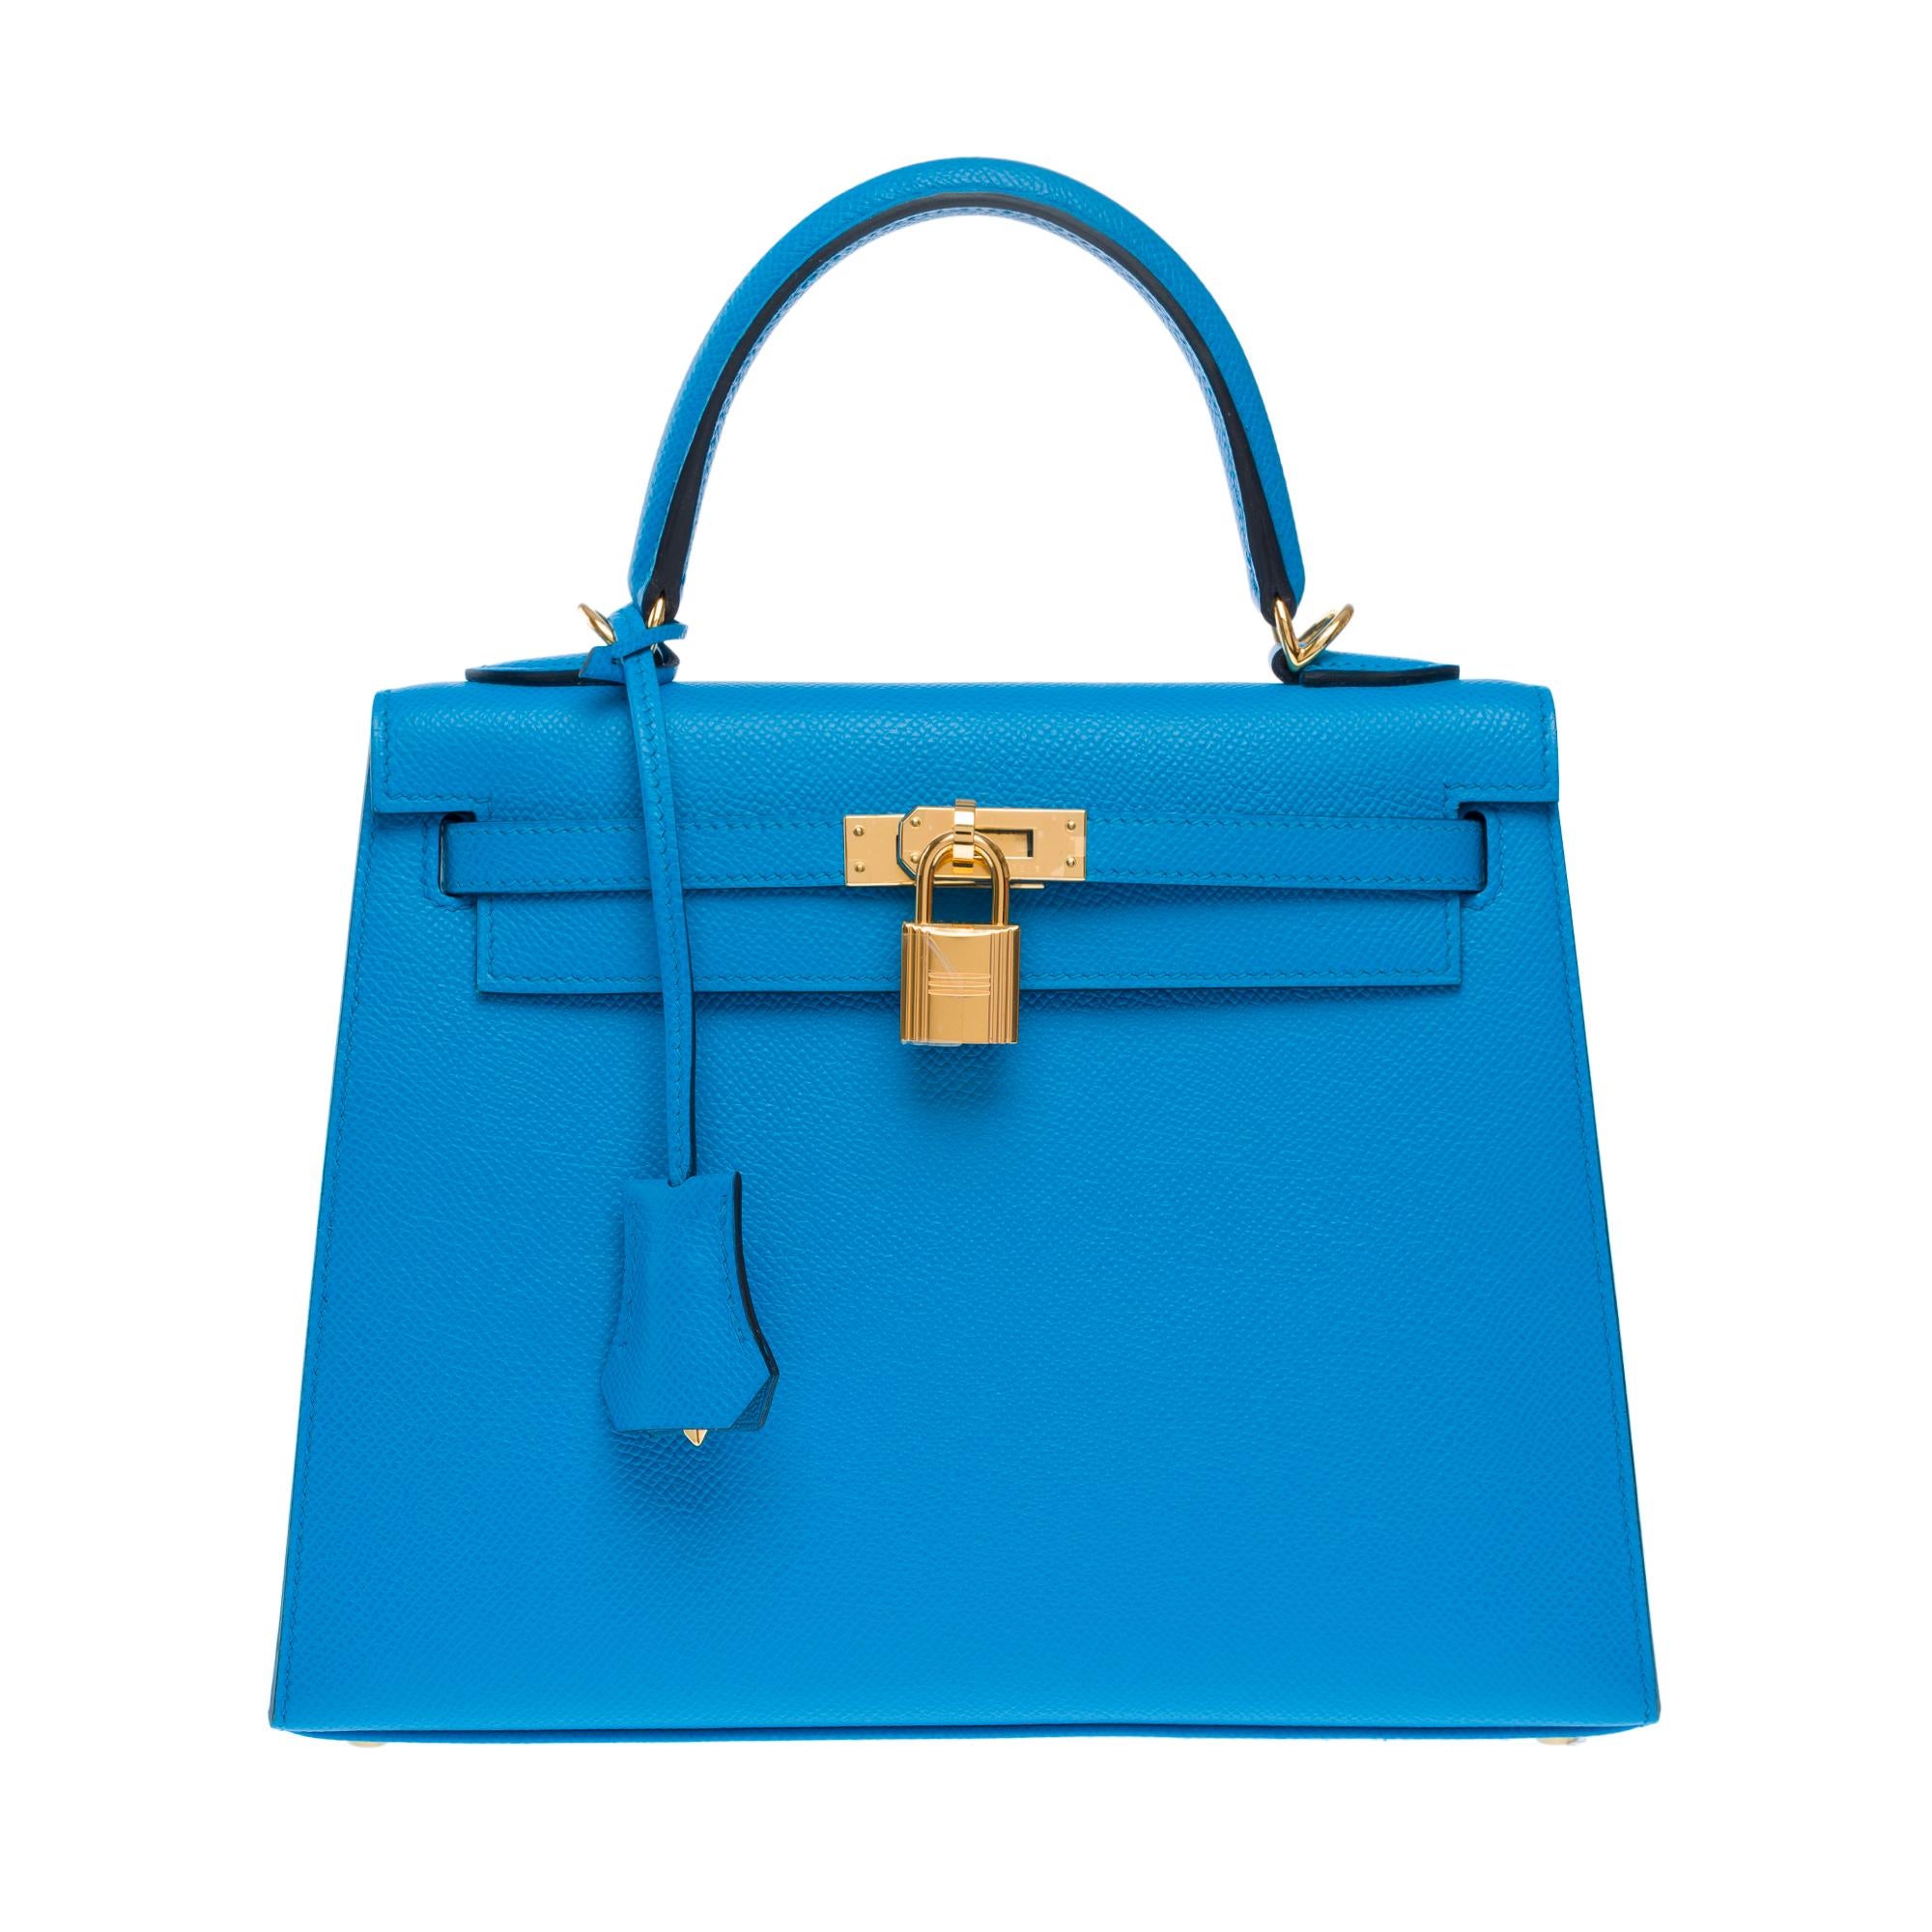 Amazing Hermès Kelly 25 handbag strap in Blue Frida Epsom calf leather, GHW In Excellent Condition For Sale In Paris, IDF